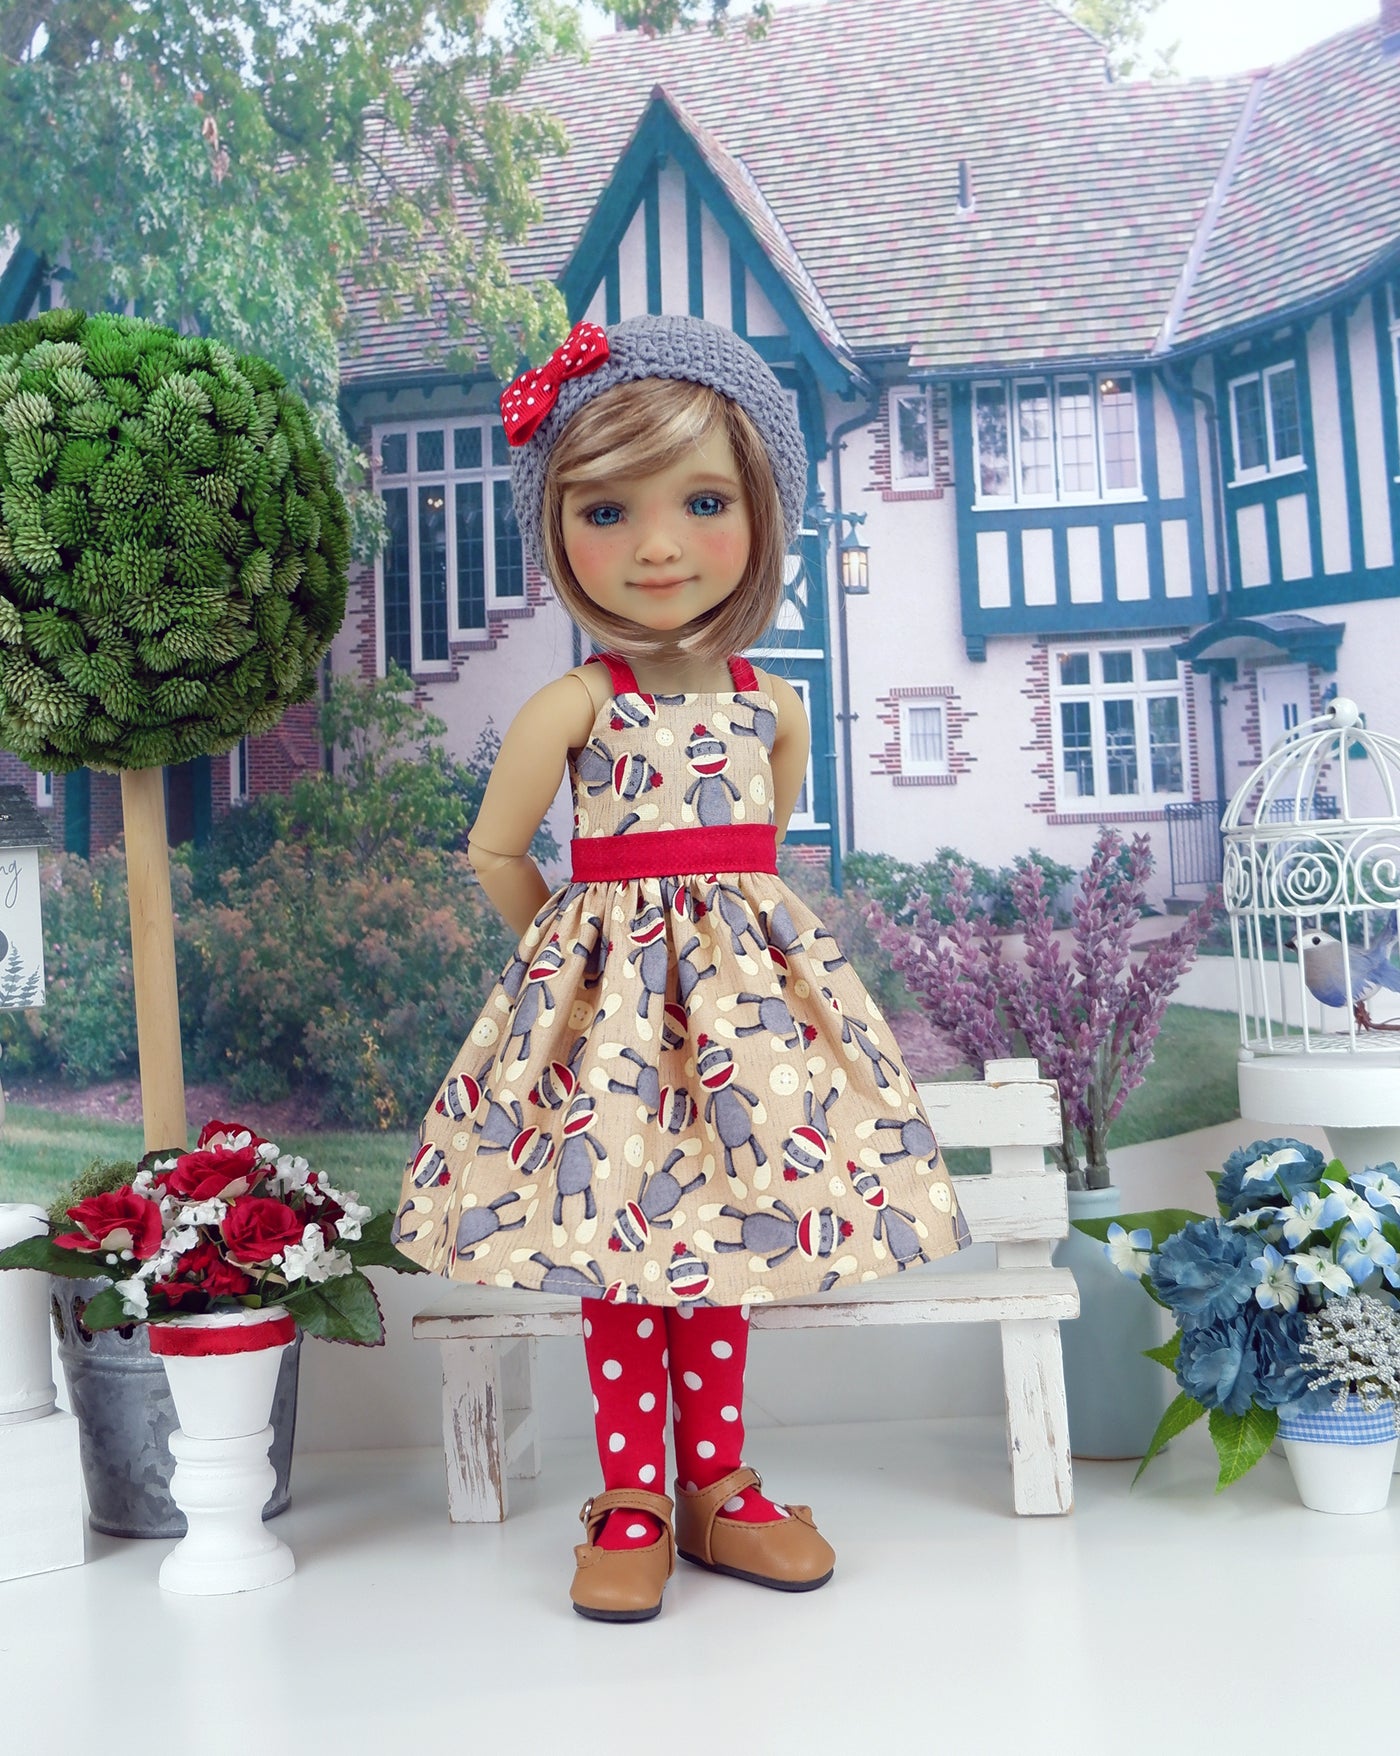 Sock Monkey - dress and sweater set with shoes for Ruby Red Fashion Friends doll